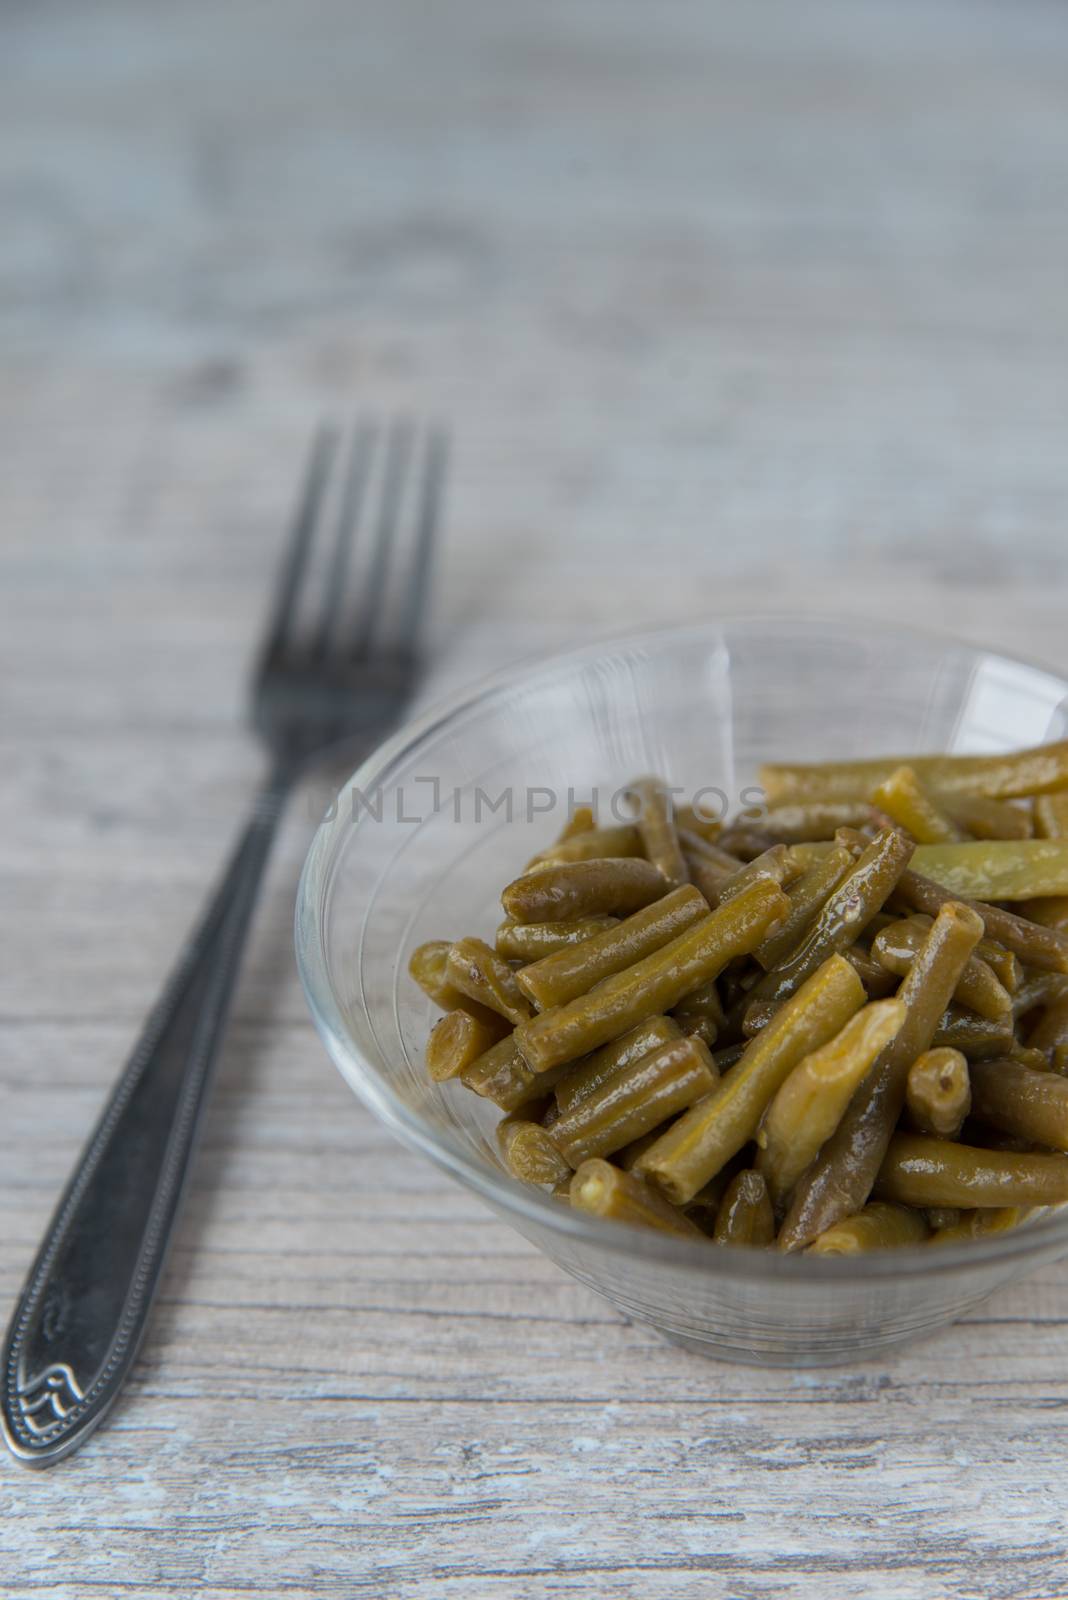 Plate of the prepared green beans and fork